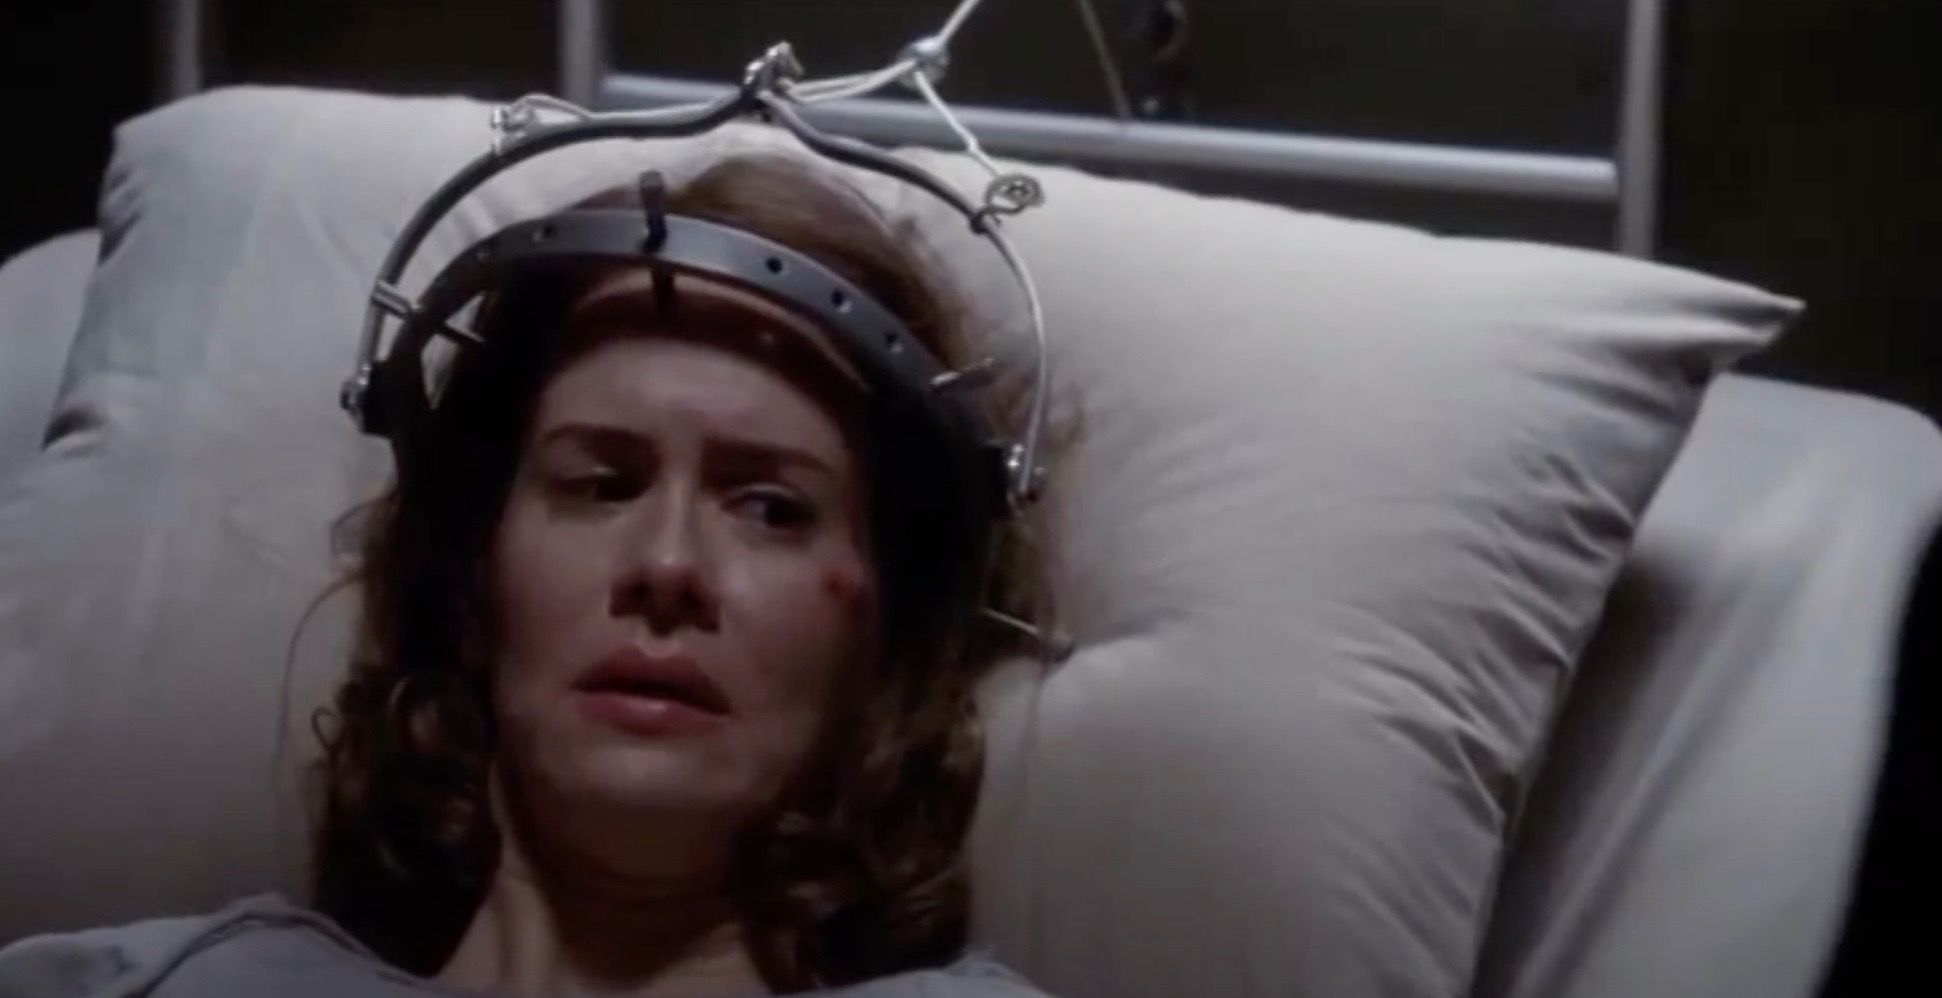 Lana in a hospital bed doing aversion therapy in American Horror Story.